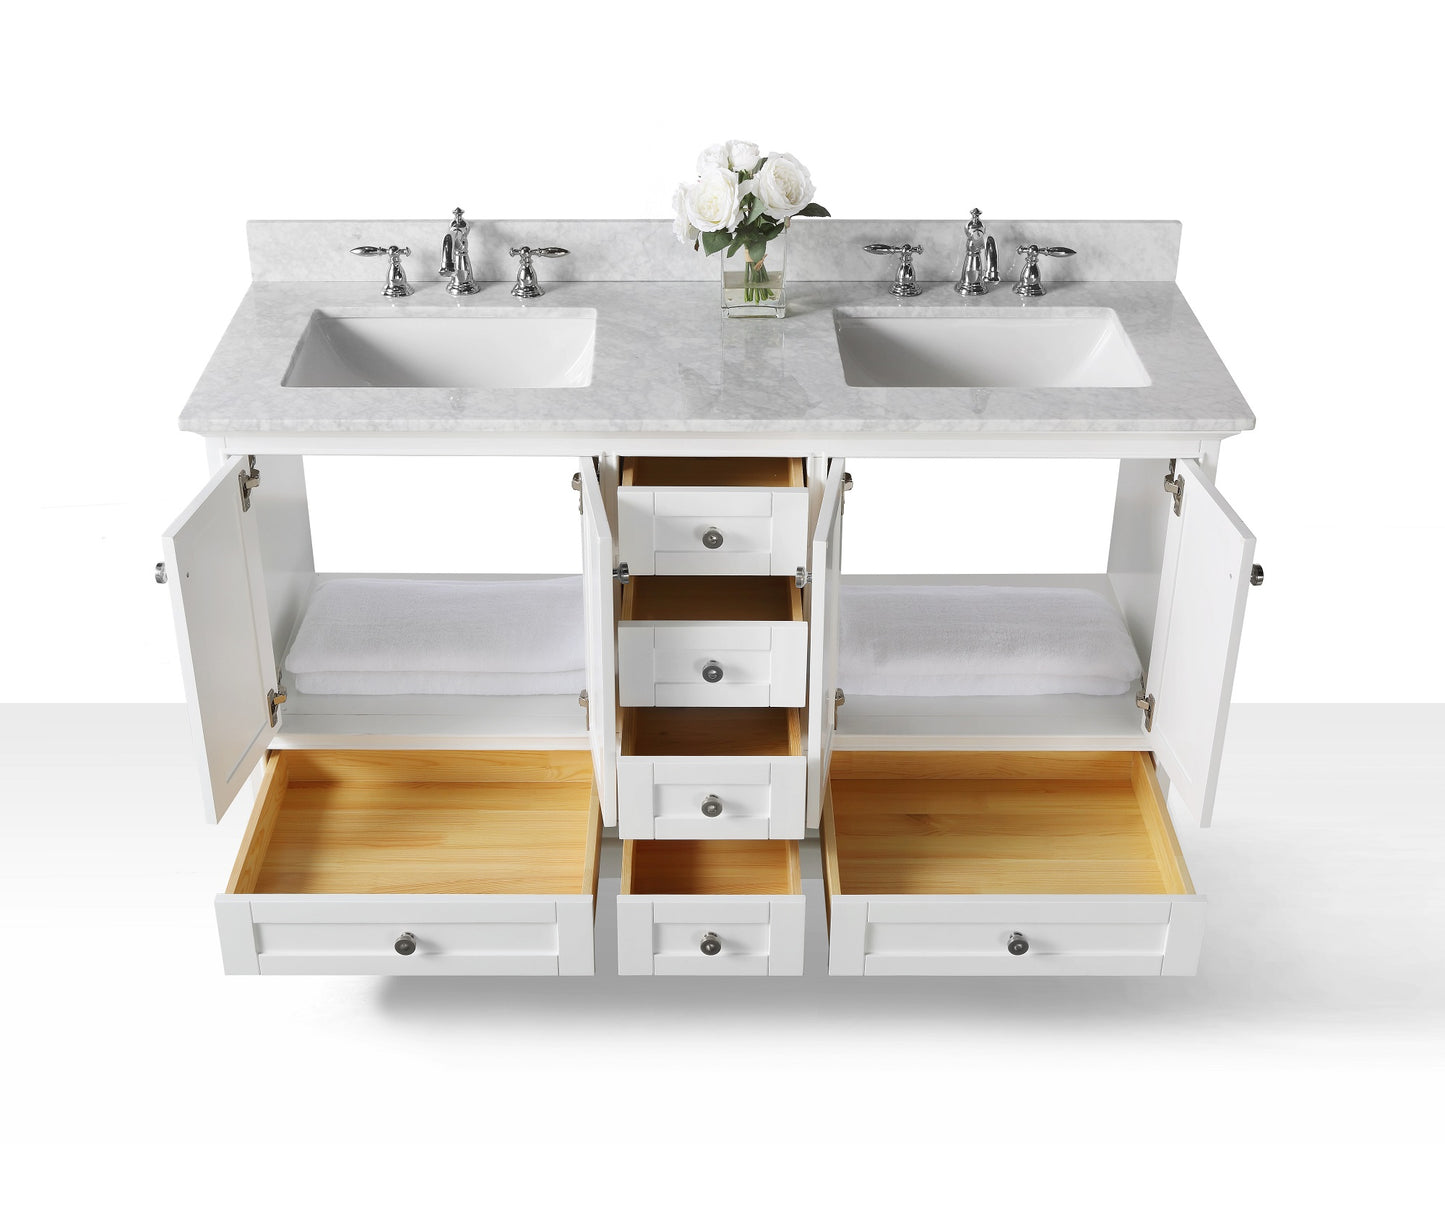 Ancerre Designs Audrey 60 in. Bath Vanity Set with Italian Carrara White Marble Vanity top and White Undermount Basin with Gold Hardware - Luxe Bathroom Vanities